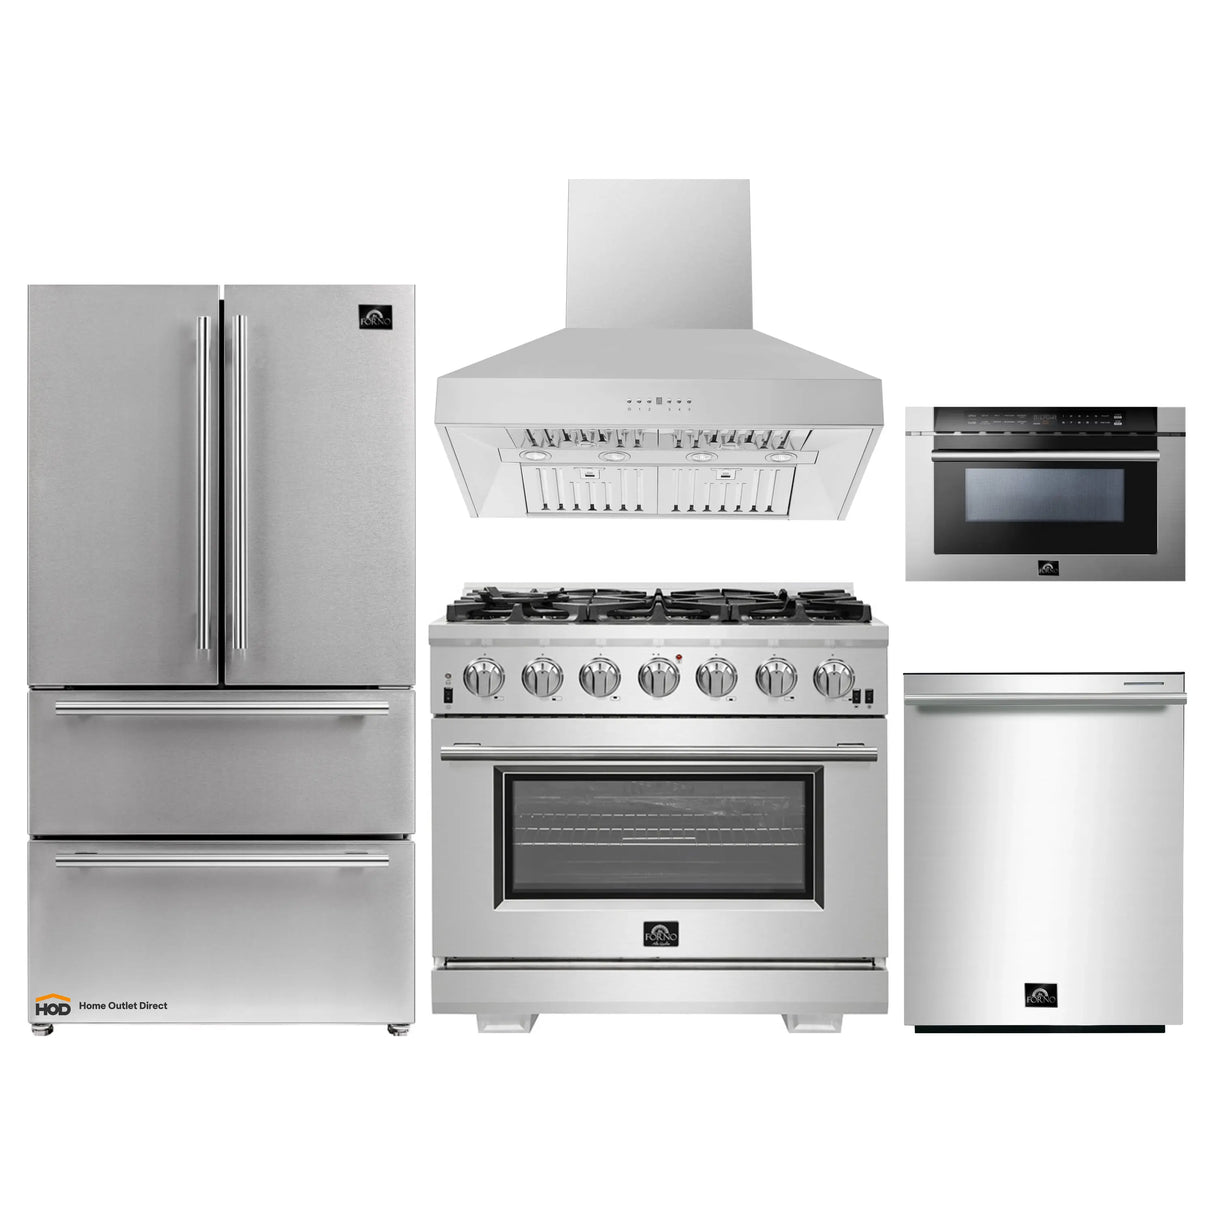 Forno 5-Piece Pro Appliance Package - 36-Inch Gas Range, Refrigerator, Wall Mount Hood, Microwave Drawer, & 3-Rack Dishwasher in Stainless Steel